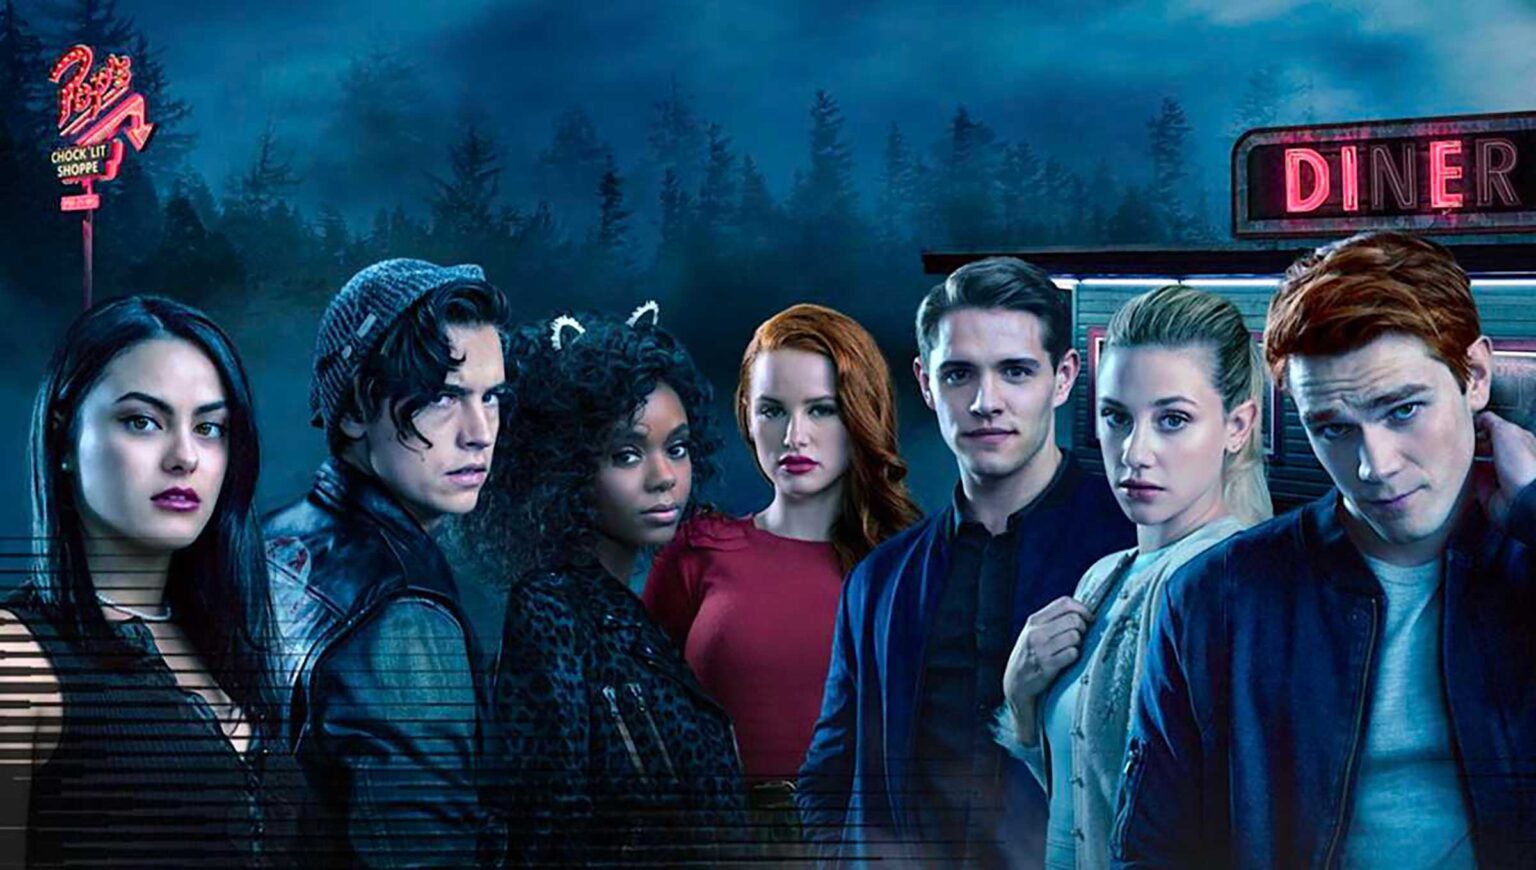 Vanessa Morgan, who plays Toni Topaz on Riverdale, recently called out the show for its lack of diverse characters.